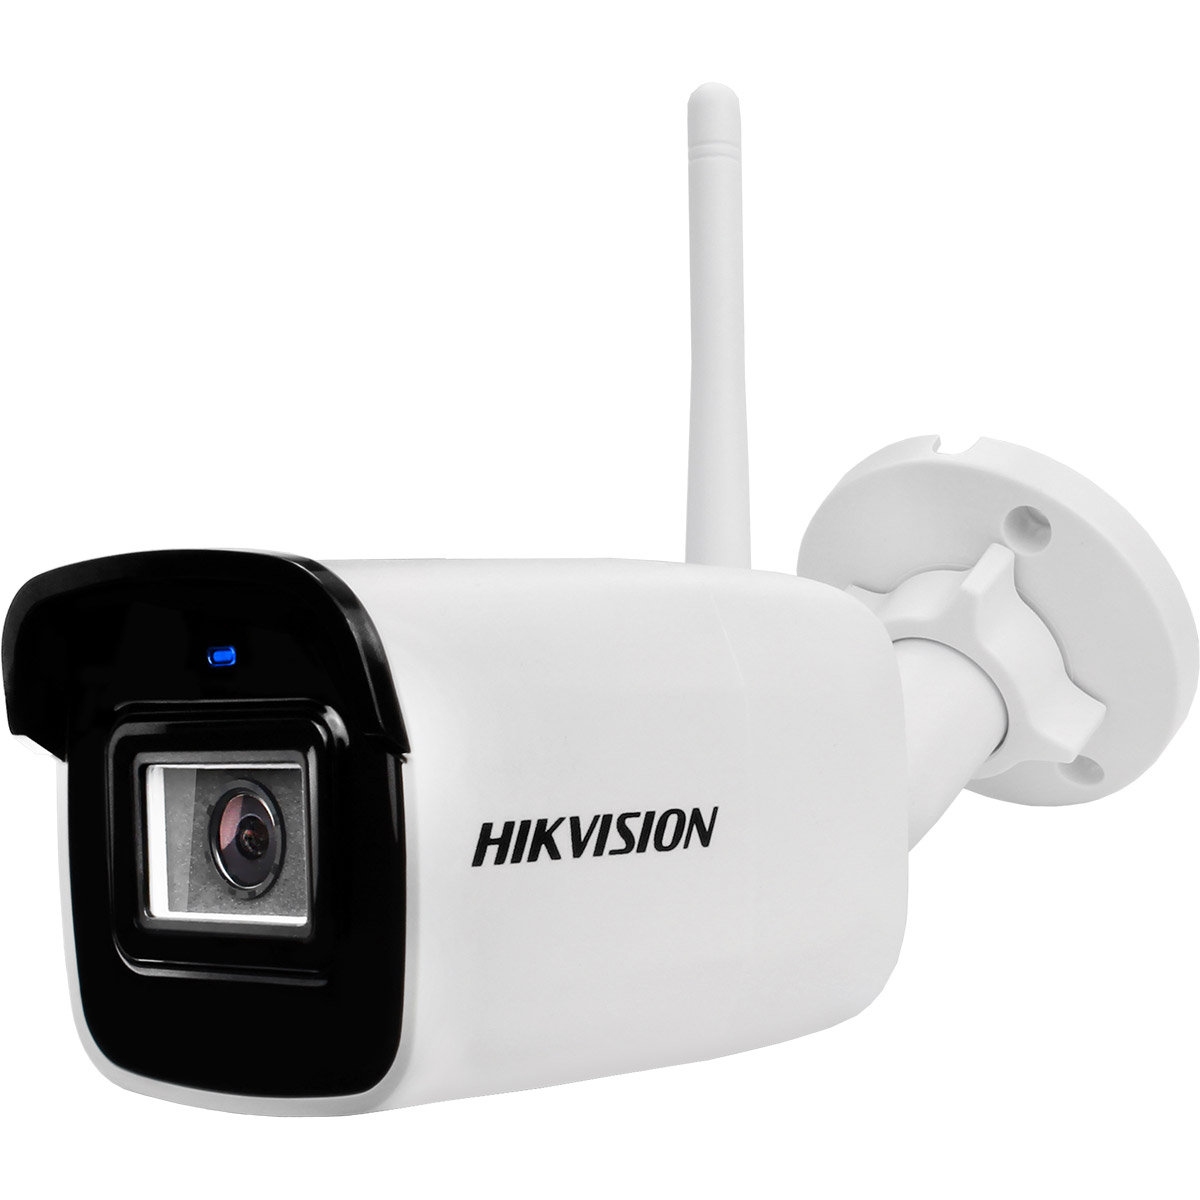 Ip камеры 4g уличная. DS-2cd2041g2-idw1. IP WIFI камера Hikvision. Hikvision DS-2cd2041g1. Hikvision камеры видеонаблюдения WIFI.